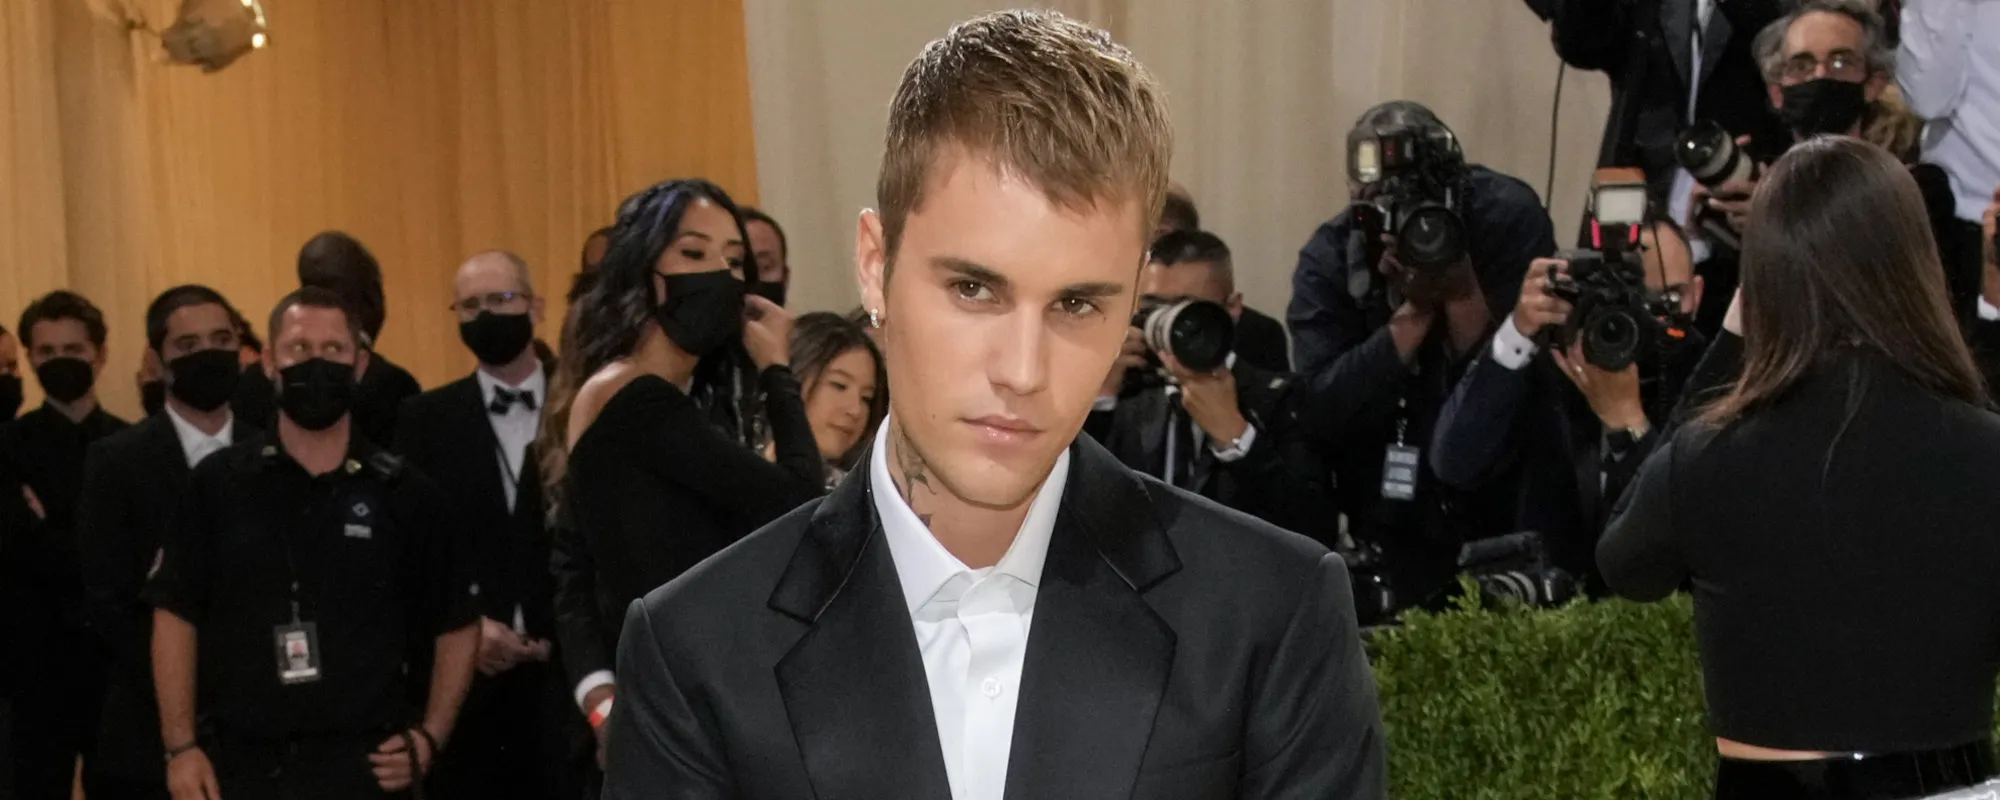 Justin Bieber Sells 100 Percent of Song Rights for Upwards of $200 Million